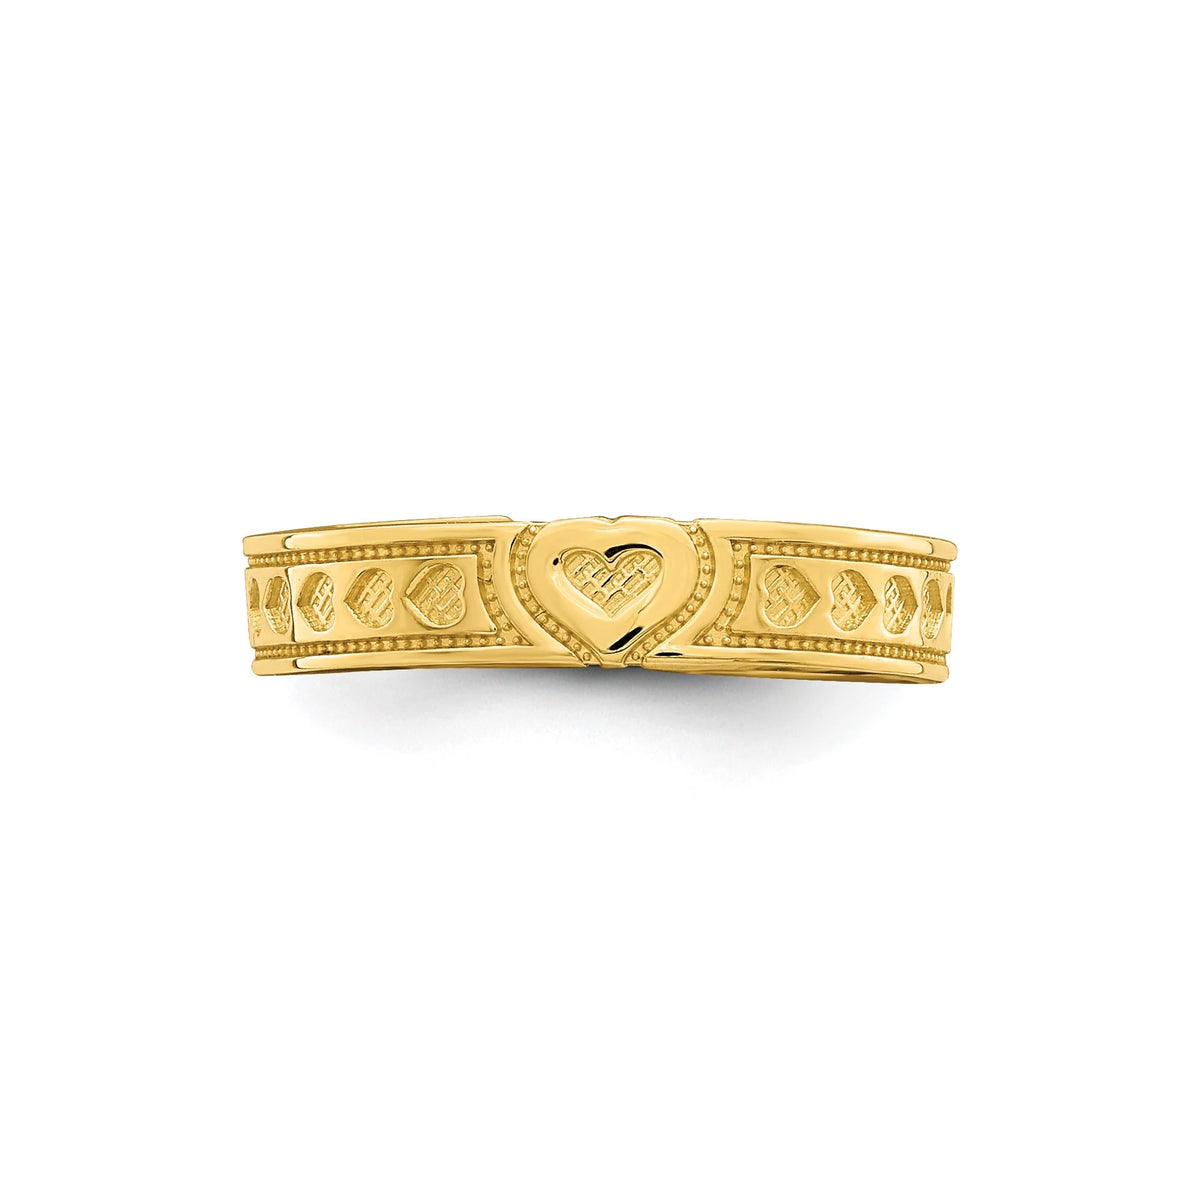 14k Yellow Gold Engraved Heart Adjustable Toe Ring  Band (Not Plated or Filled) Genuine 14k Yellow Gold - Gift Box Included - Made in USA